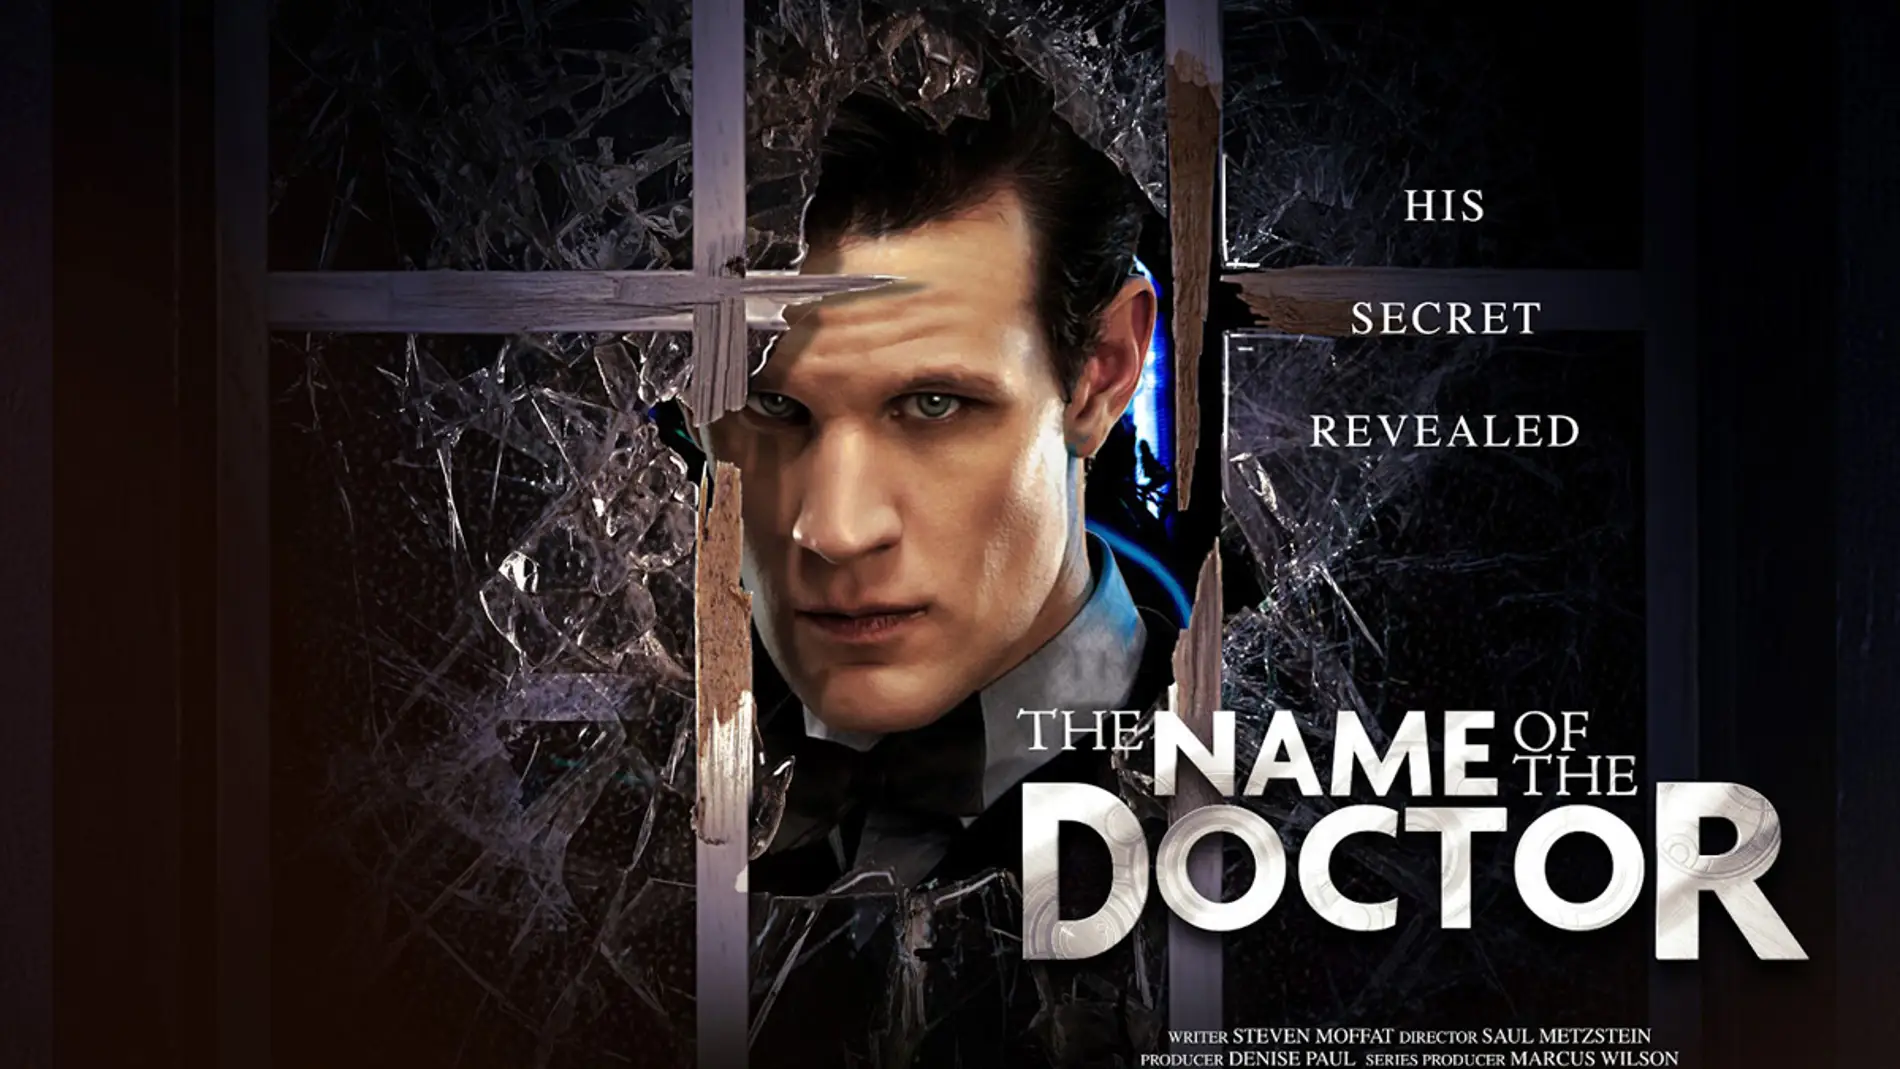 'Doctor Who' - "The Day of the Doctor"